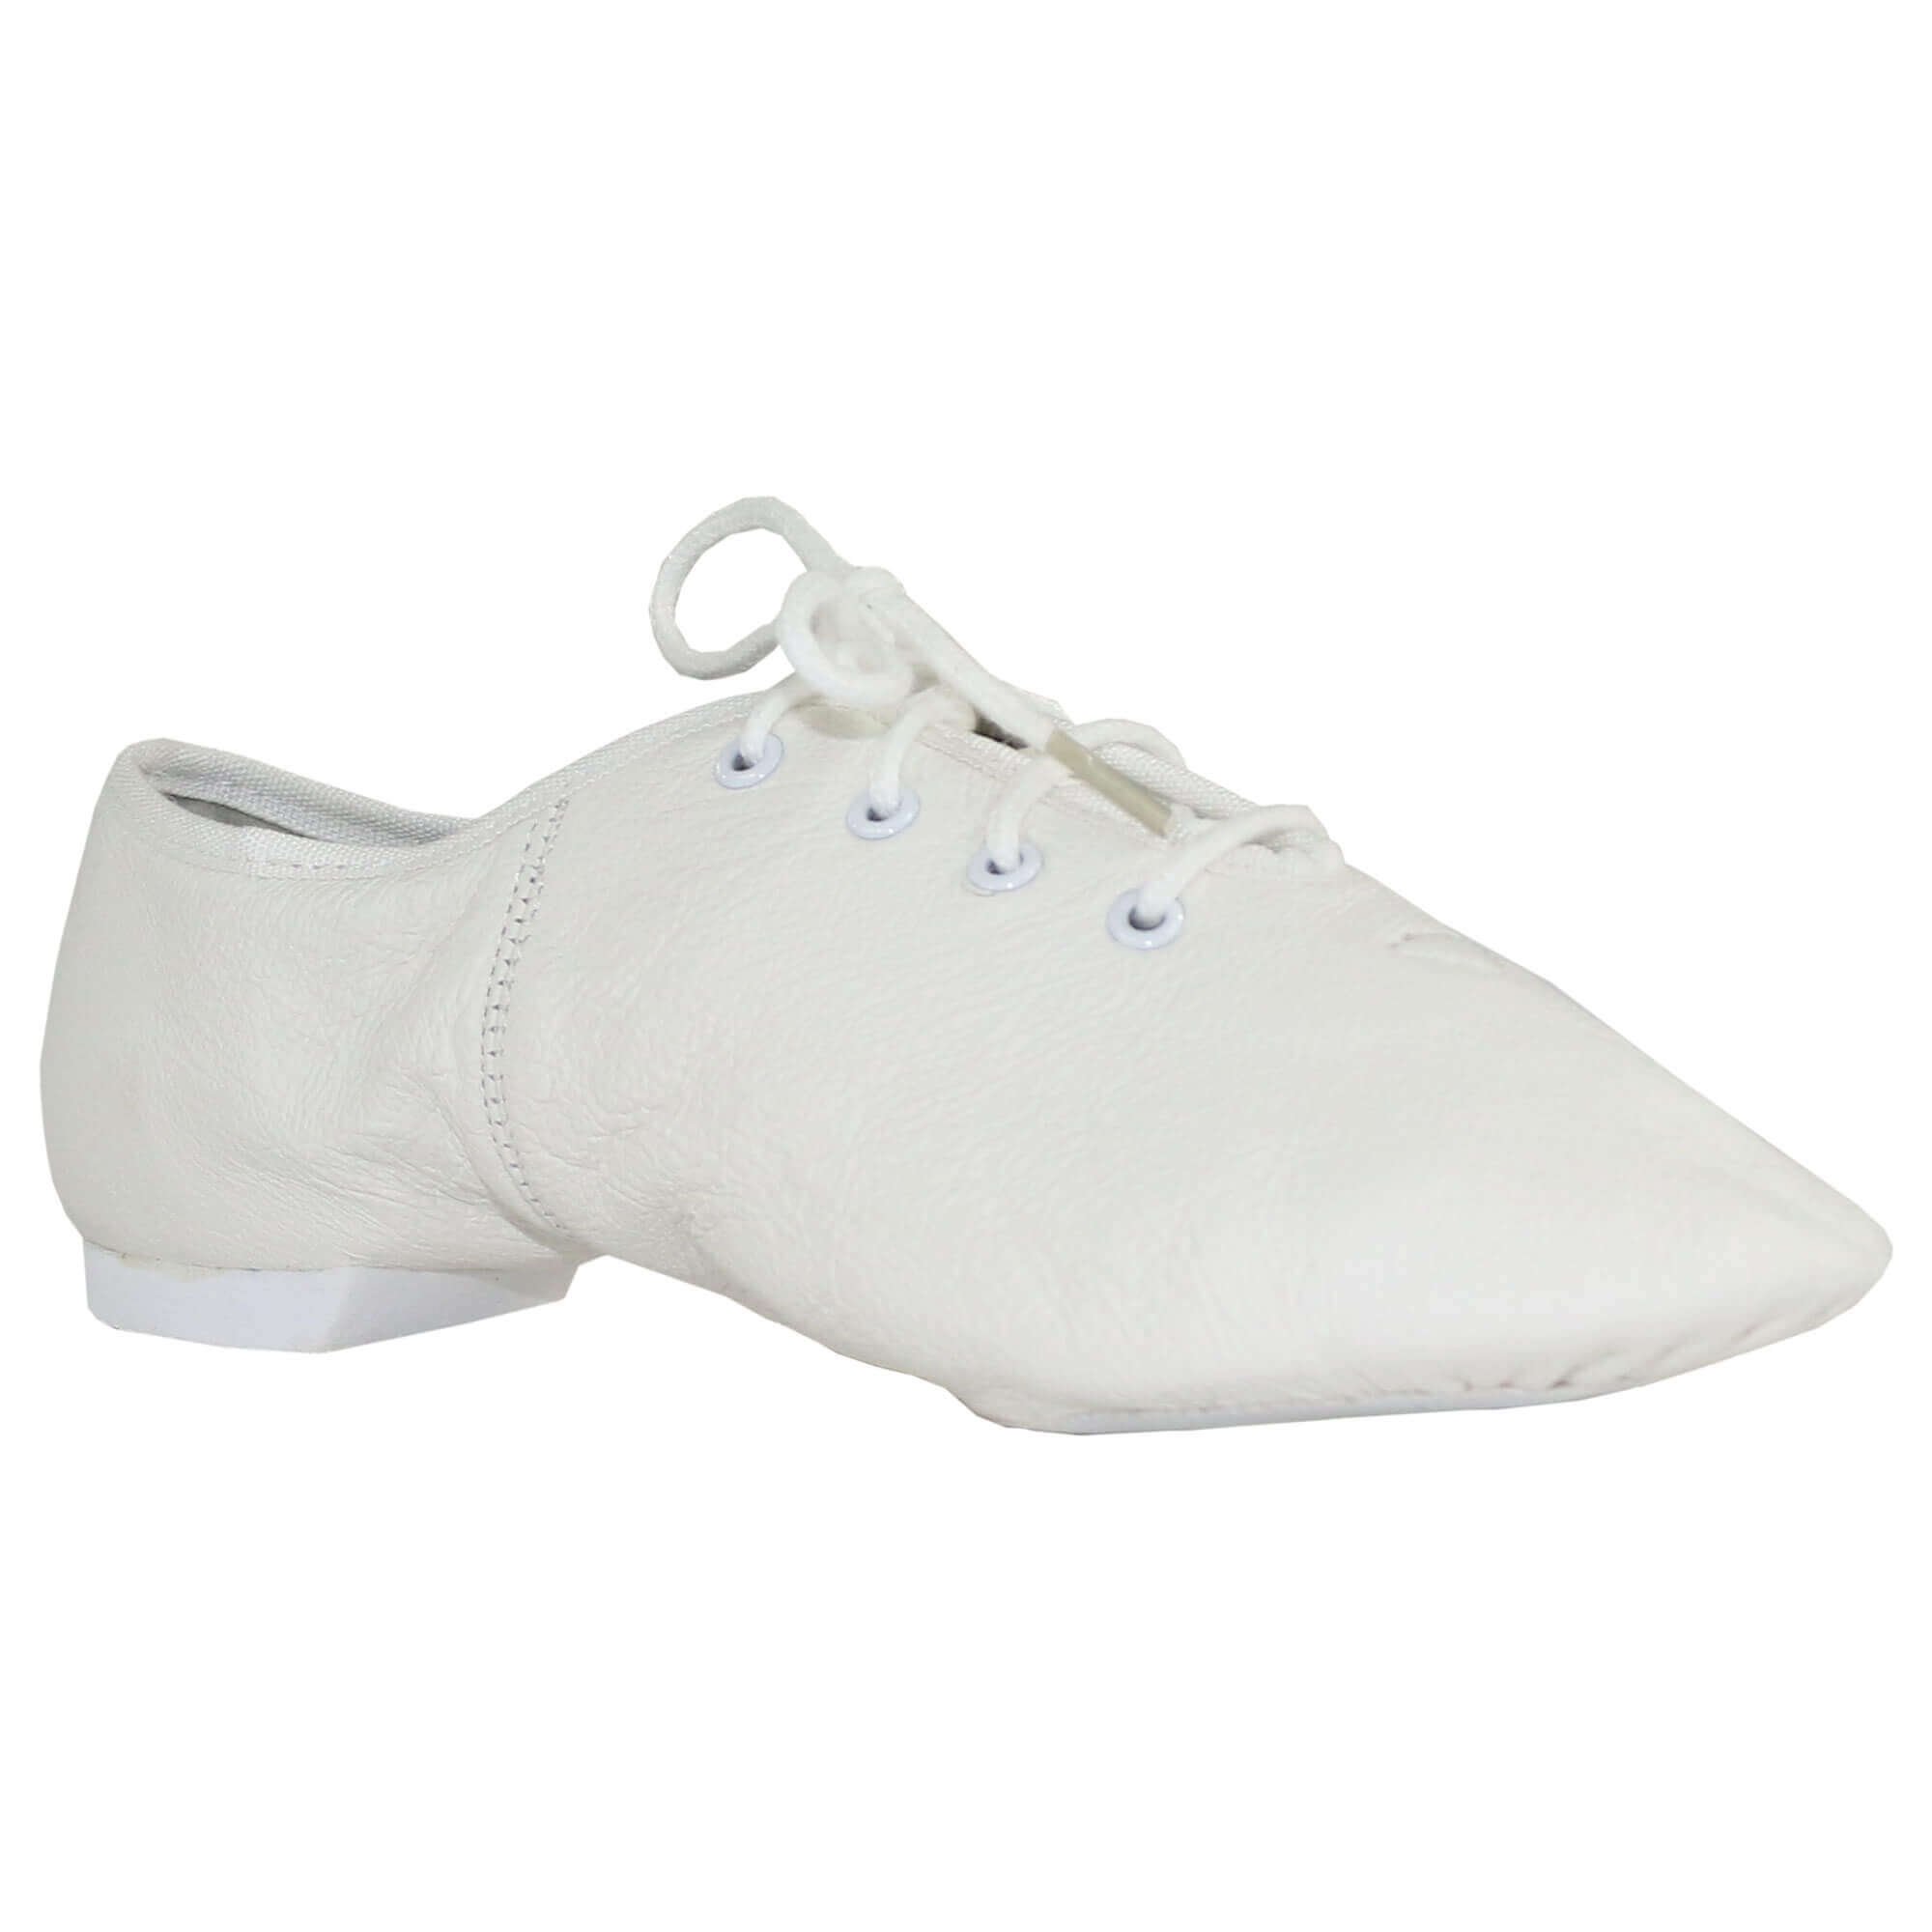 Danzcue Youth "Jazzsoft" Jazz Shoes - Click Image to Close